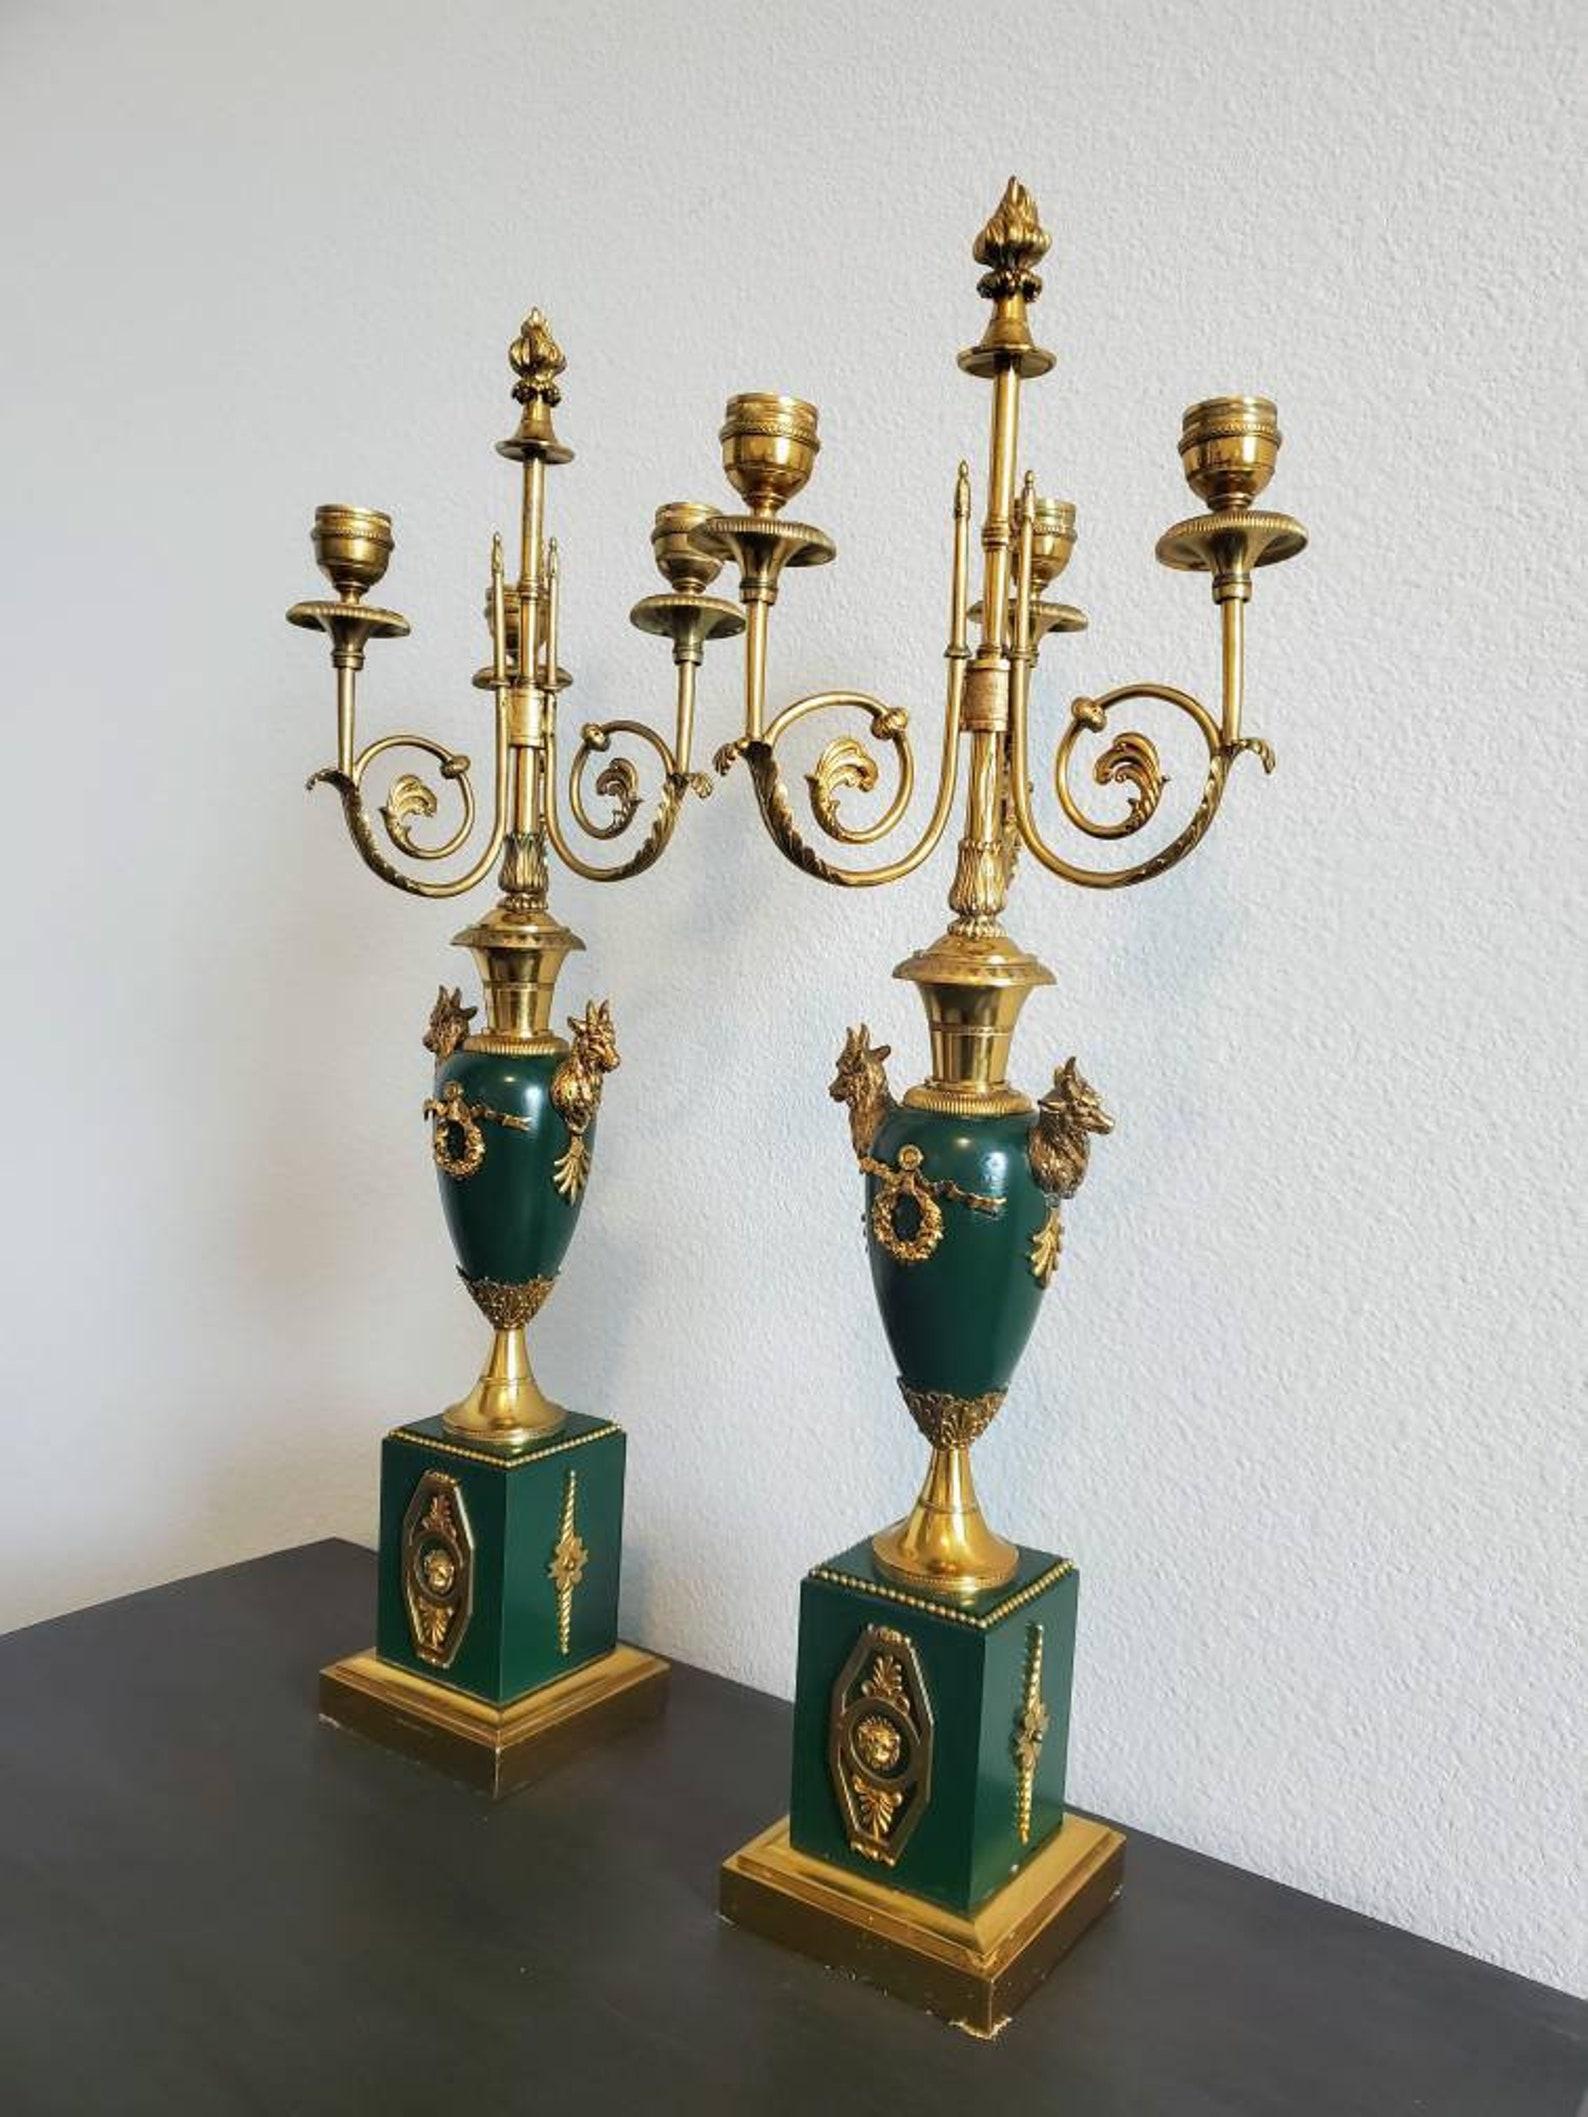 Gilt Pair of Early 19th Century French Empire Period Candelabras For Sale